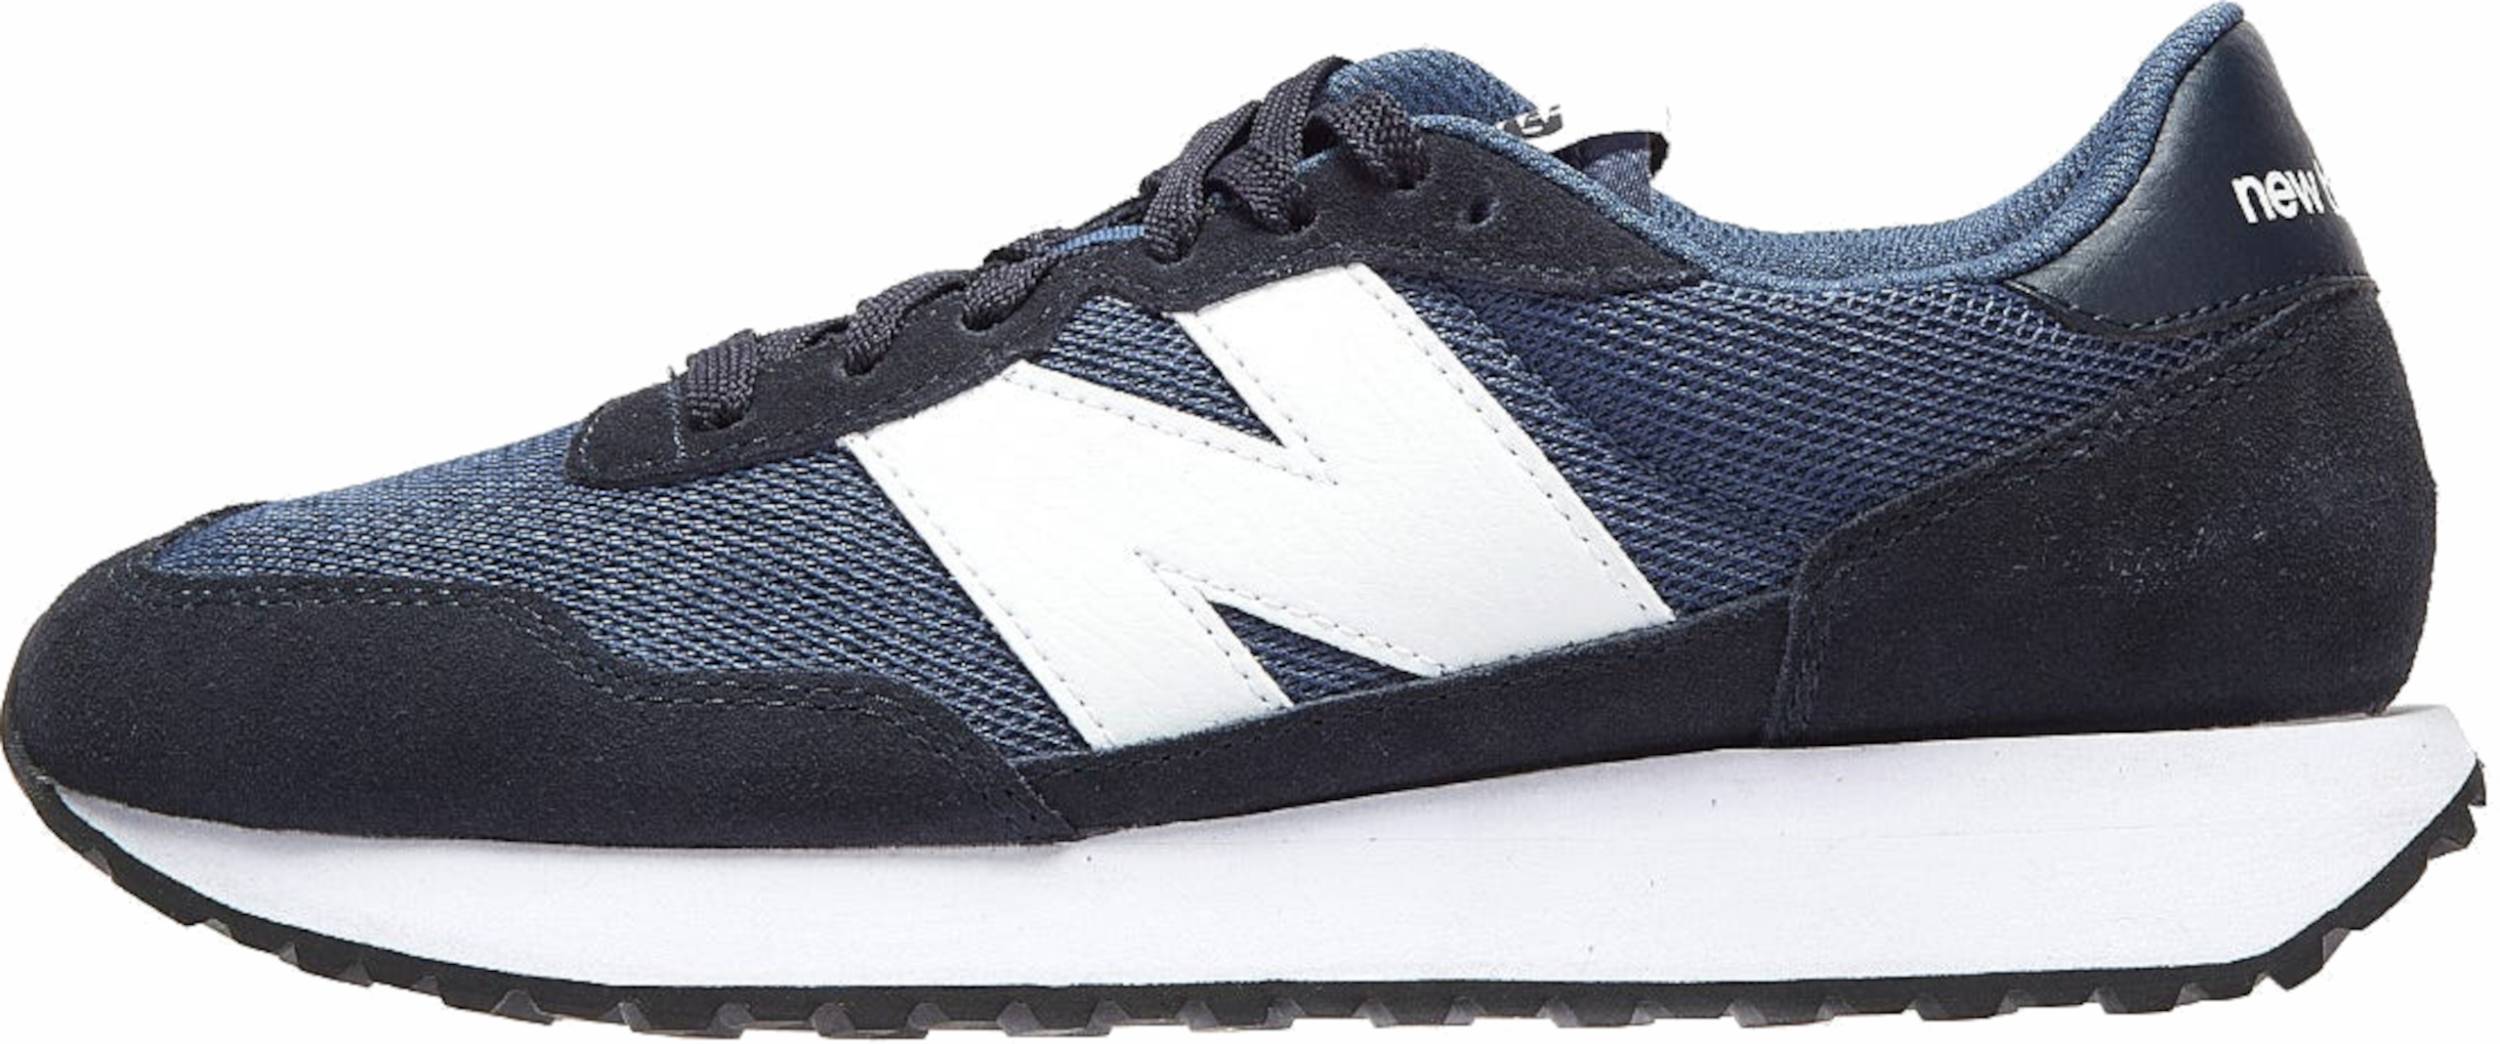 New Balance 237 sneakers in 20+ colors (only $50) | RunRepeat